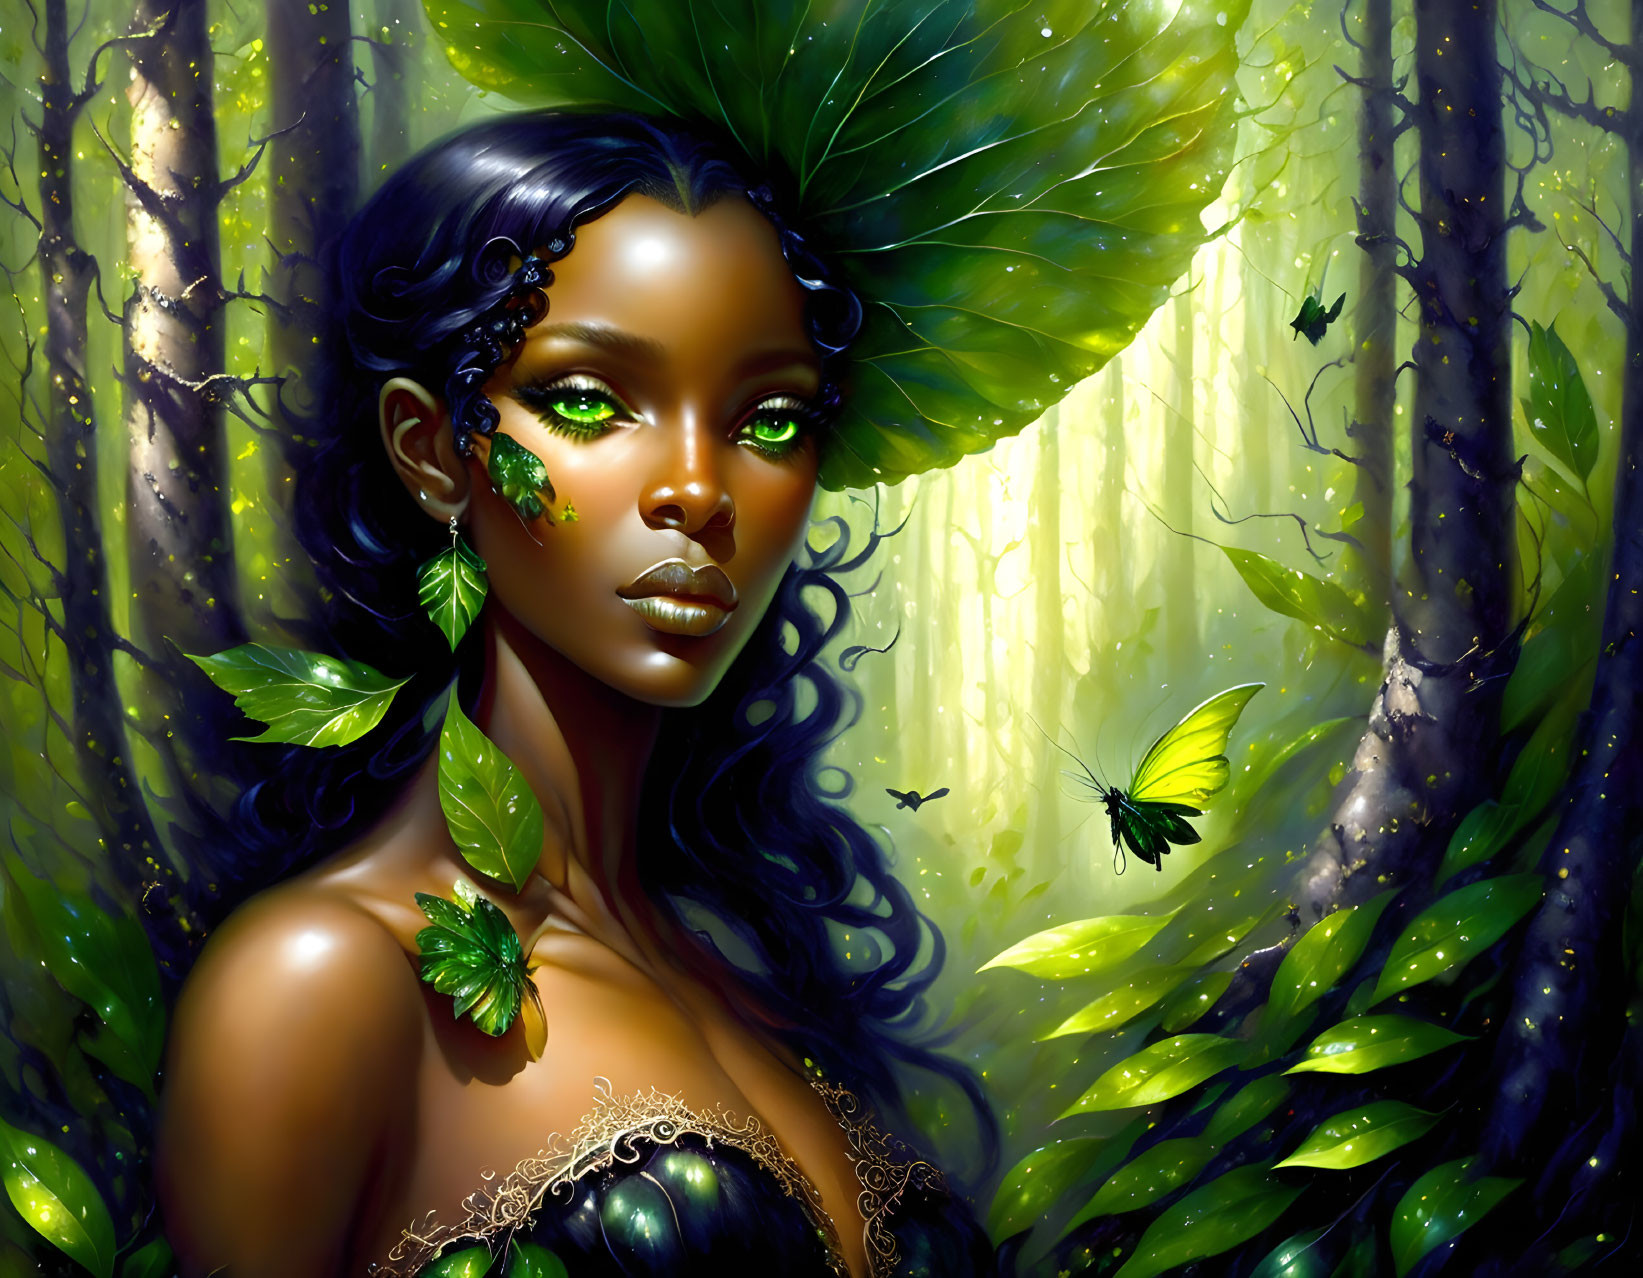 Fantasy illustration of woman with green eyes in forest setting